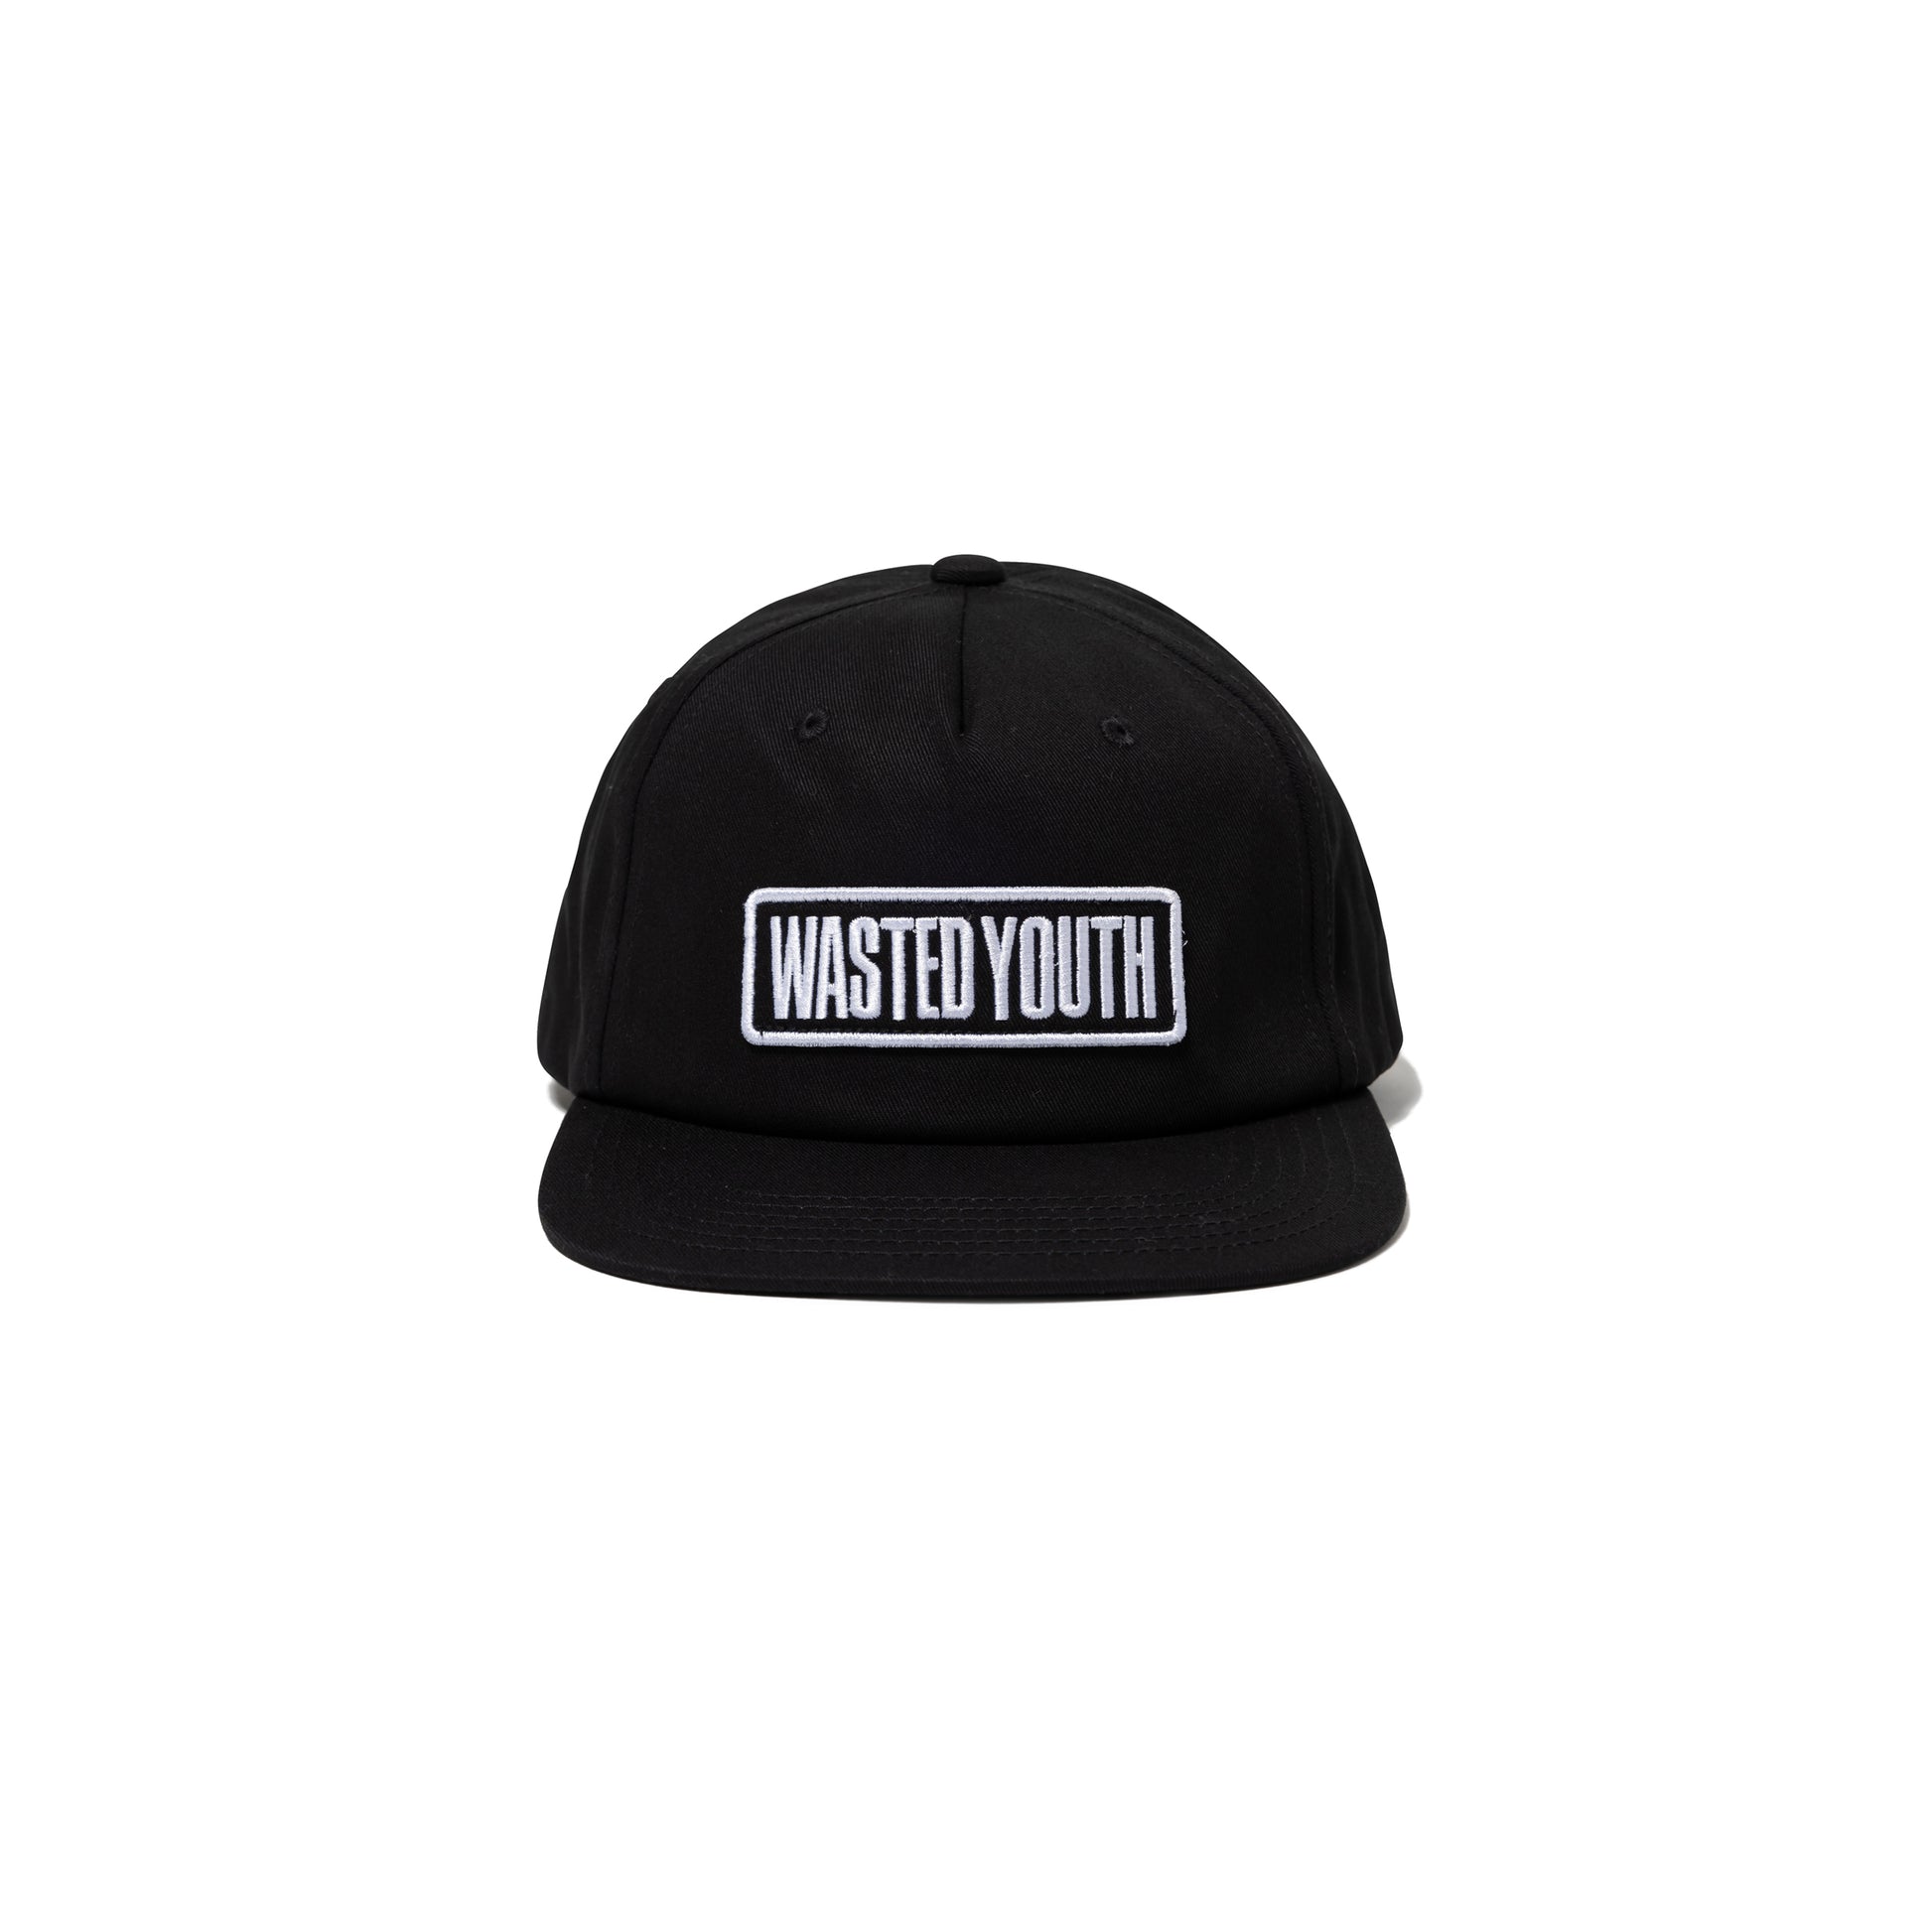 Wasted Youth 5 PANEL SNAPBACK CAP